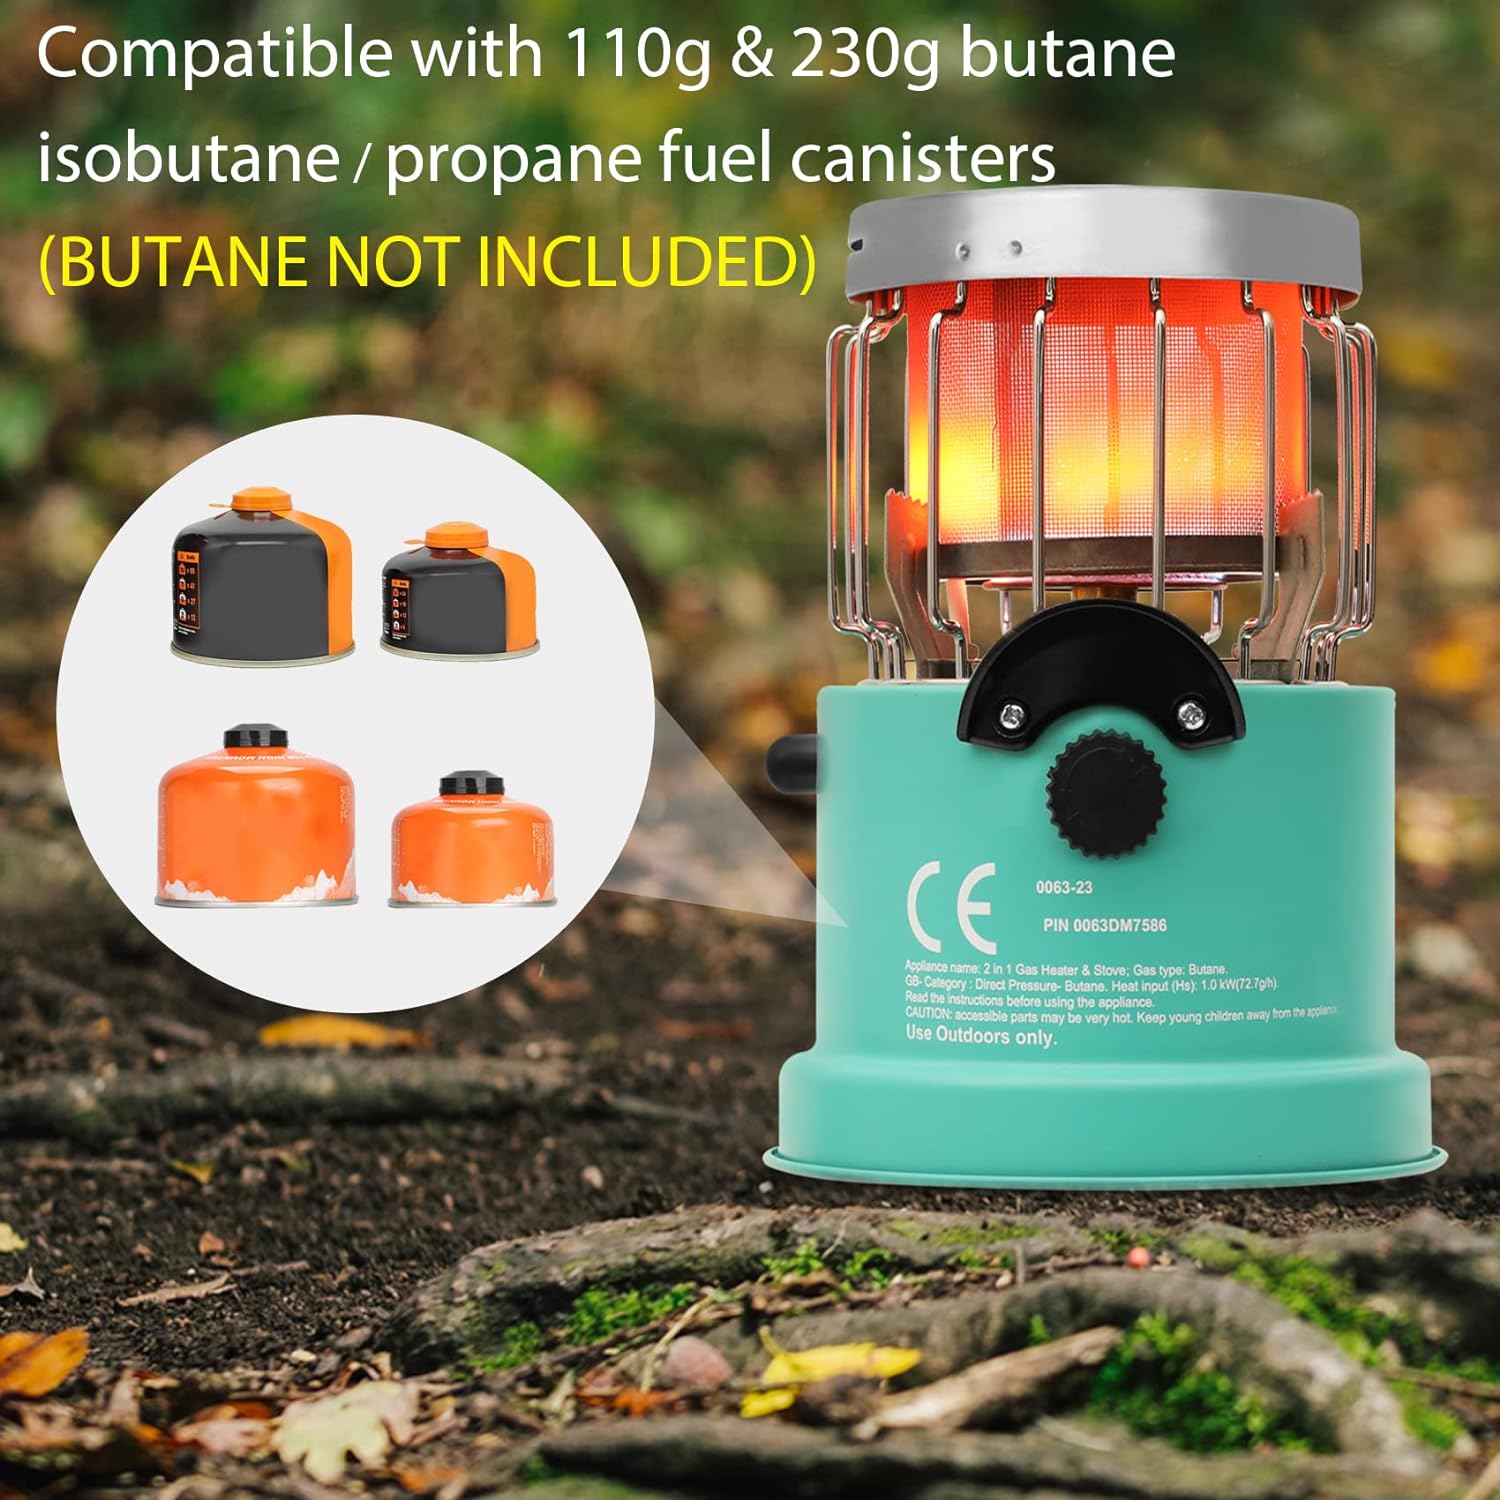 2 in 1 Camping Heater & Stove Review